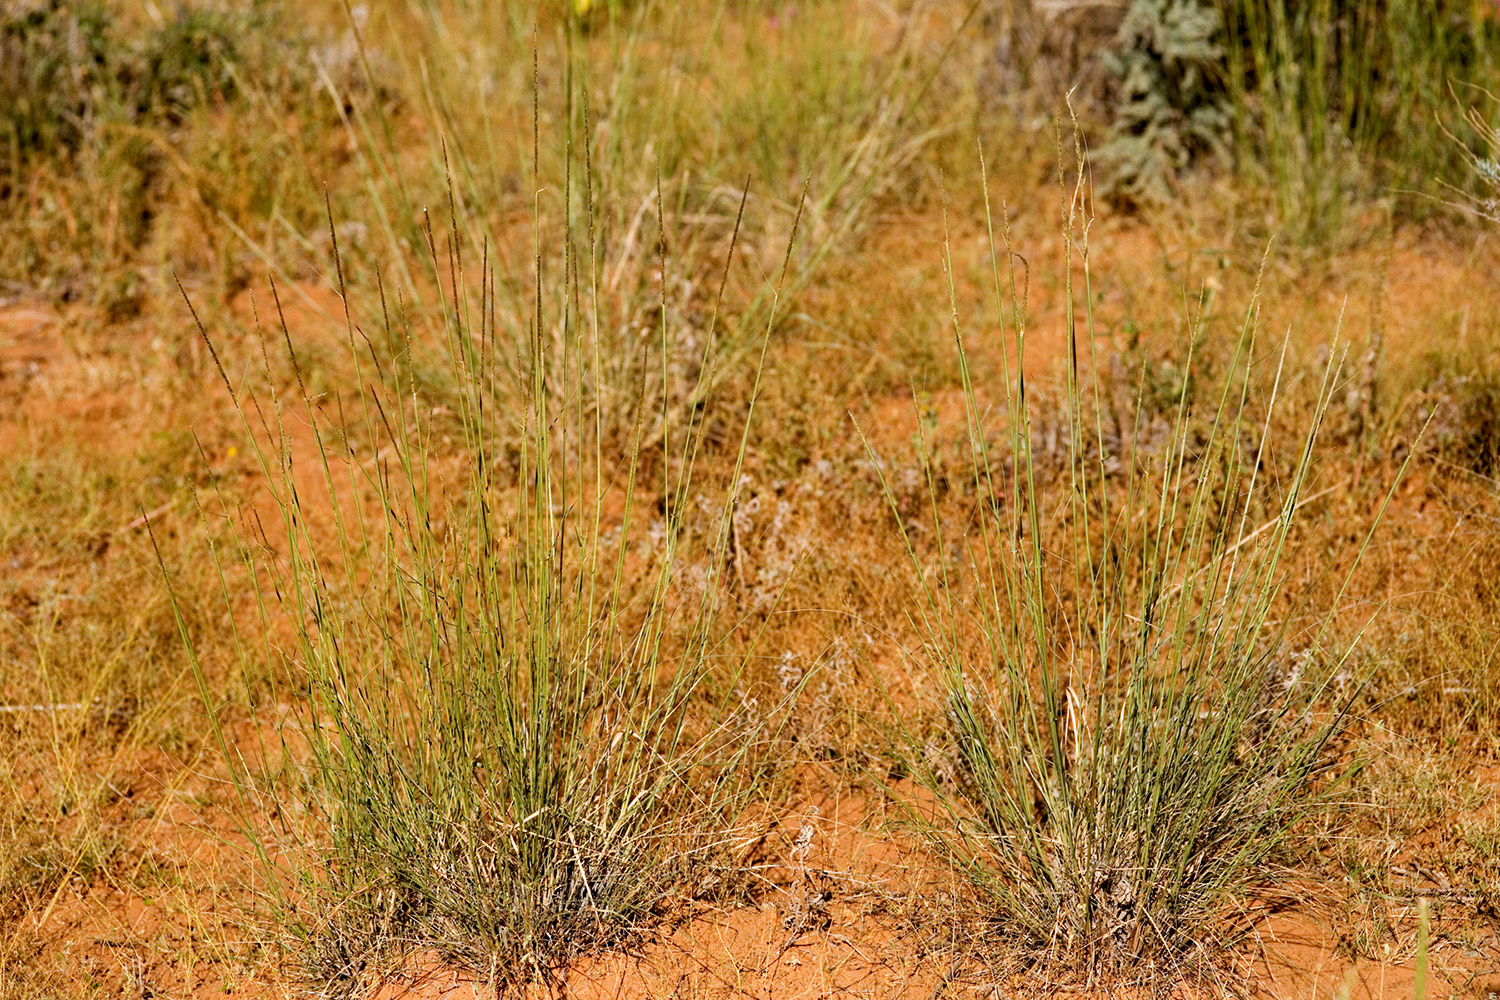 Bunchy growth habit with stems and seed spikes